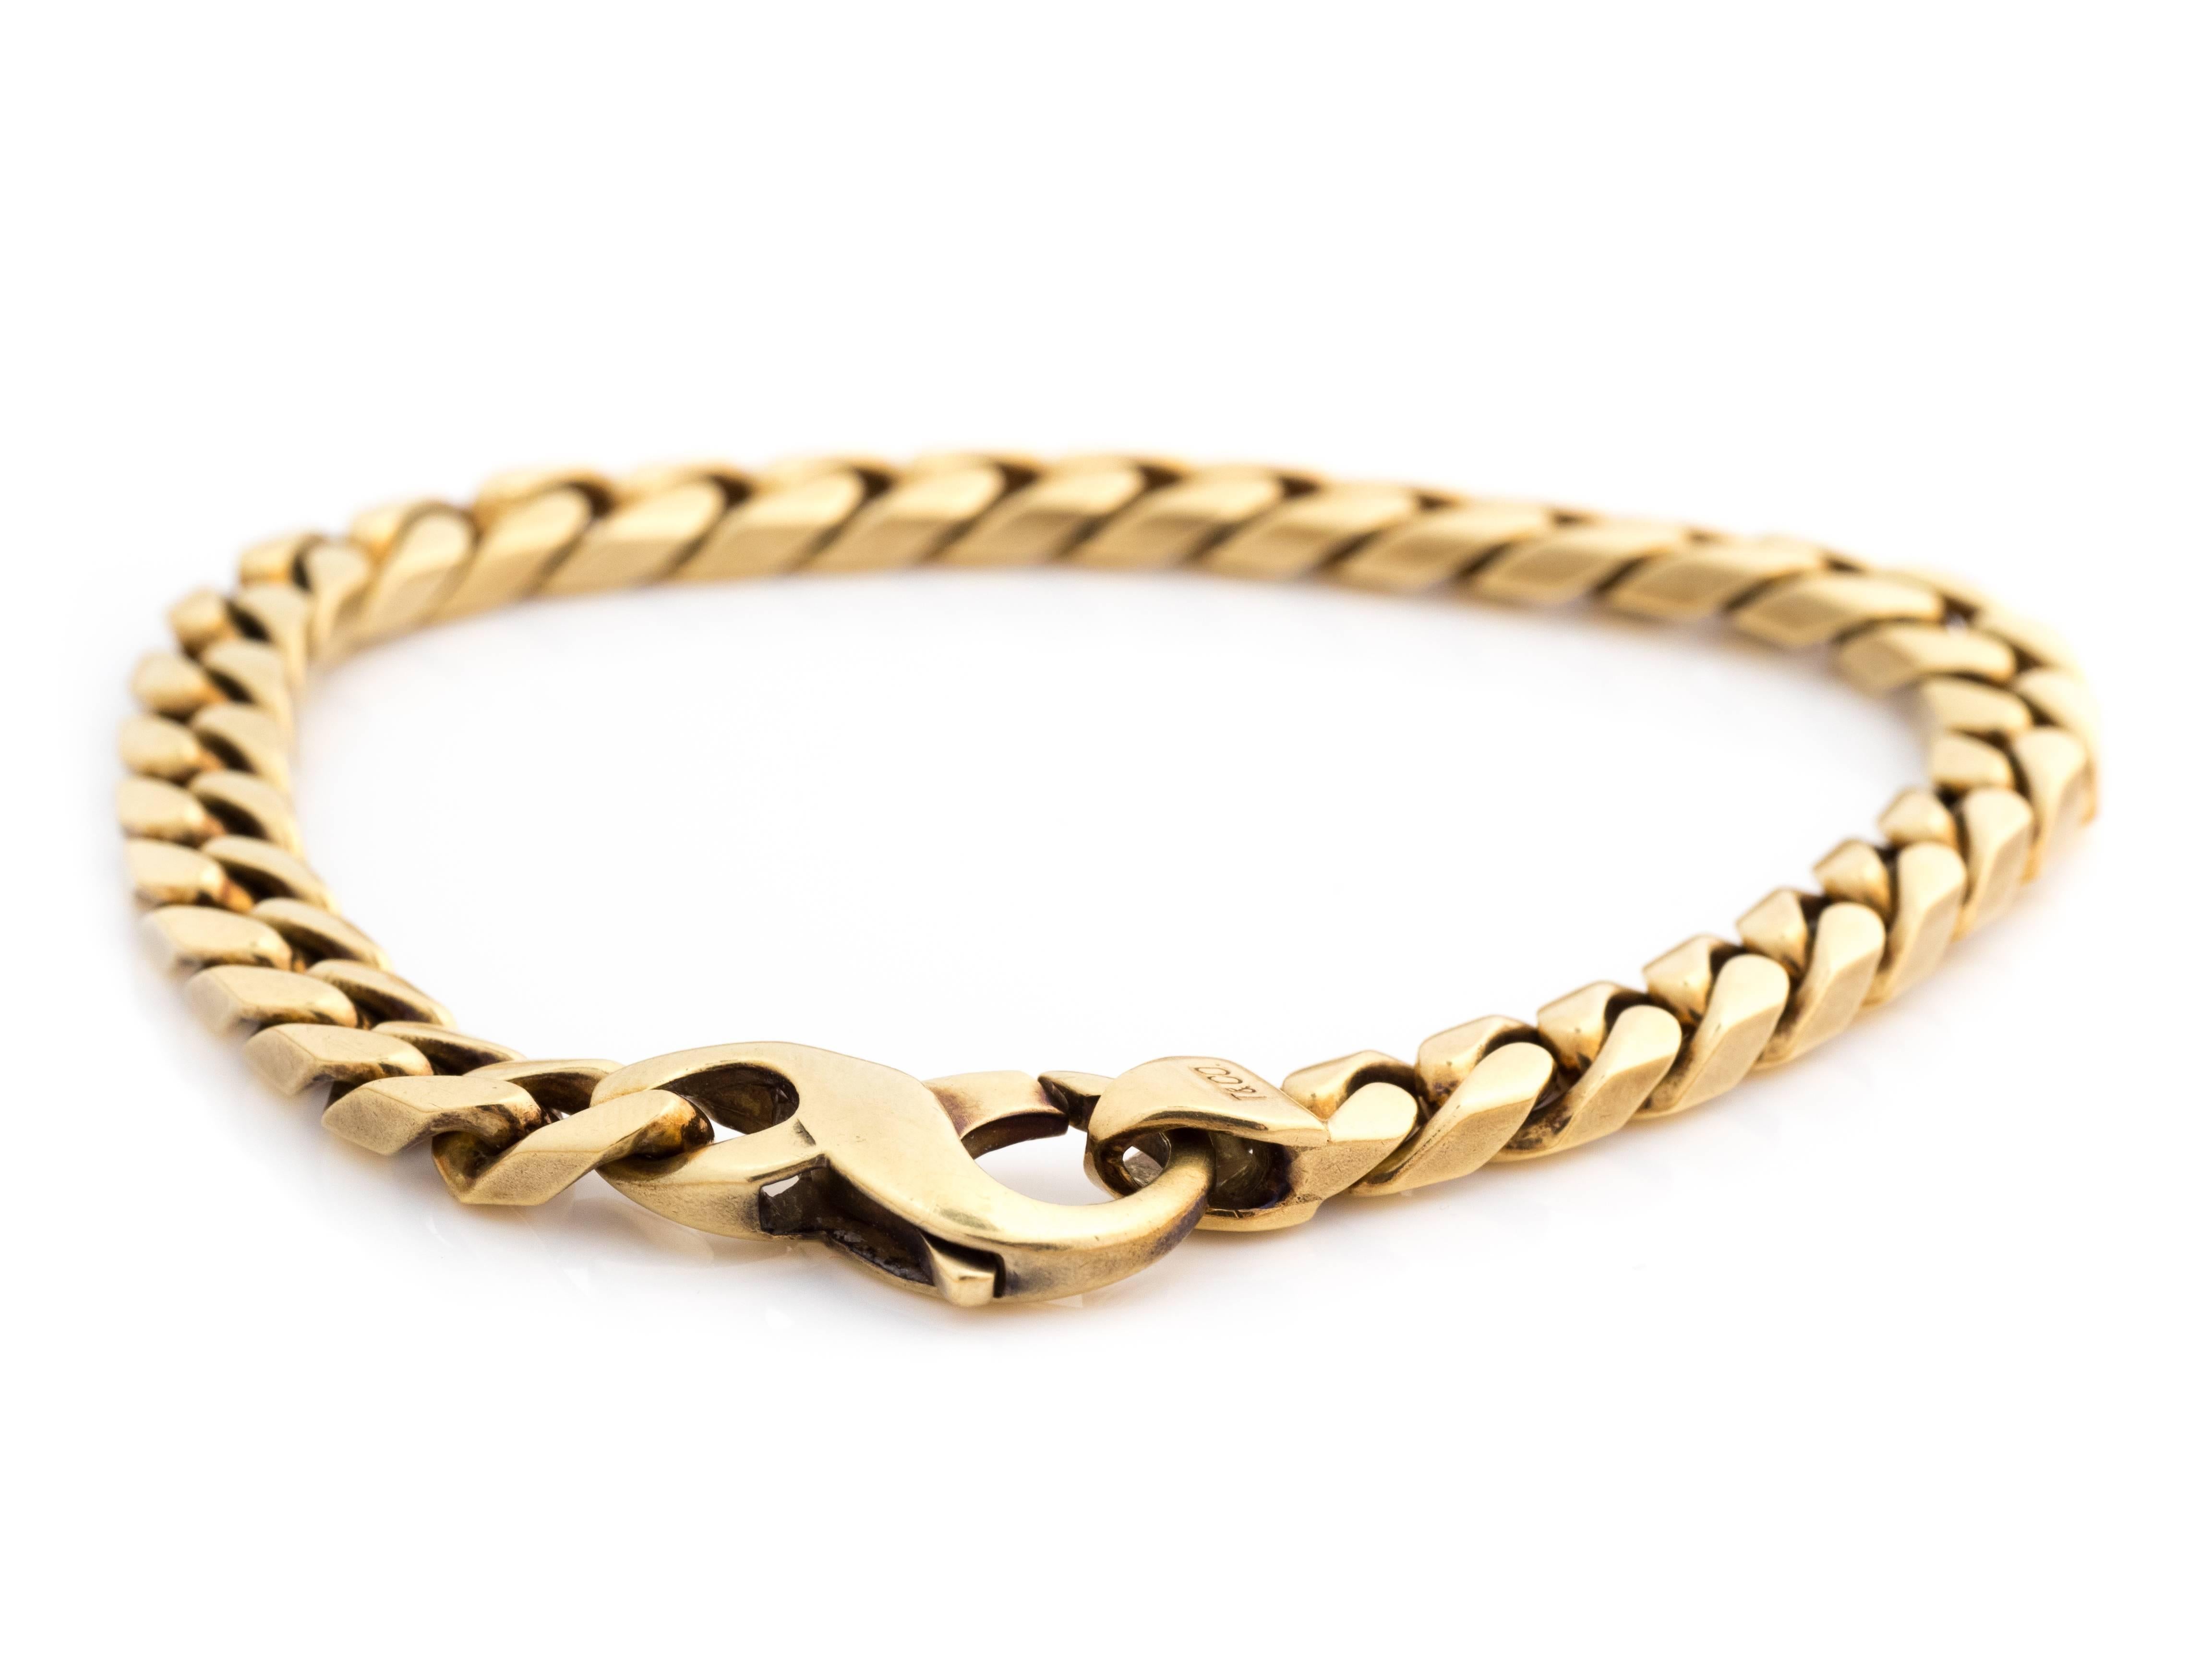 Tiffany and Co 18 Karat Yellow Gold Italian Curb Chain Bracelet. 

Features a Lobster Claw Clasp for extra wearing security. Hallmarks include Tiffany and Co., 750 and ITALY. Measures 8 inches long, can be sized down.

Solid, sturdy, smooth and